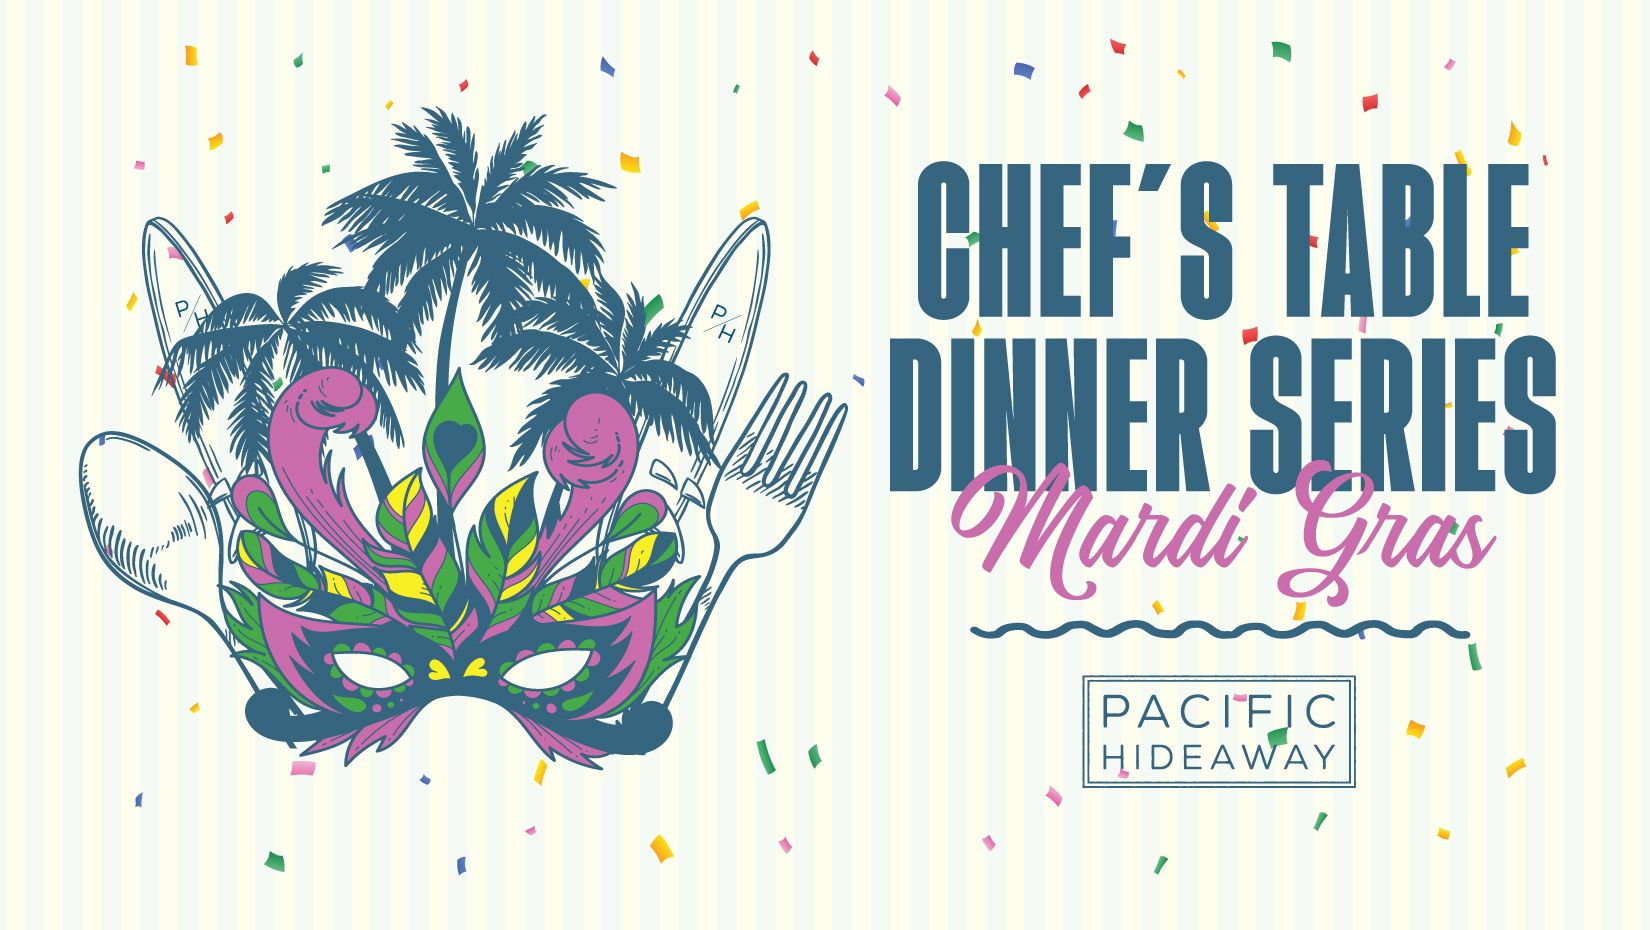 Pacific Hideaway special event